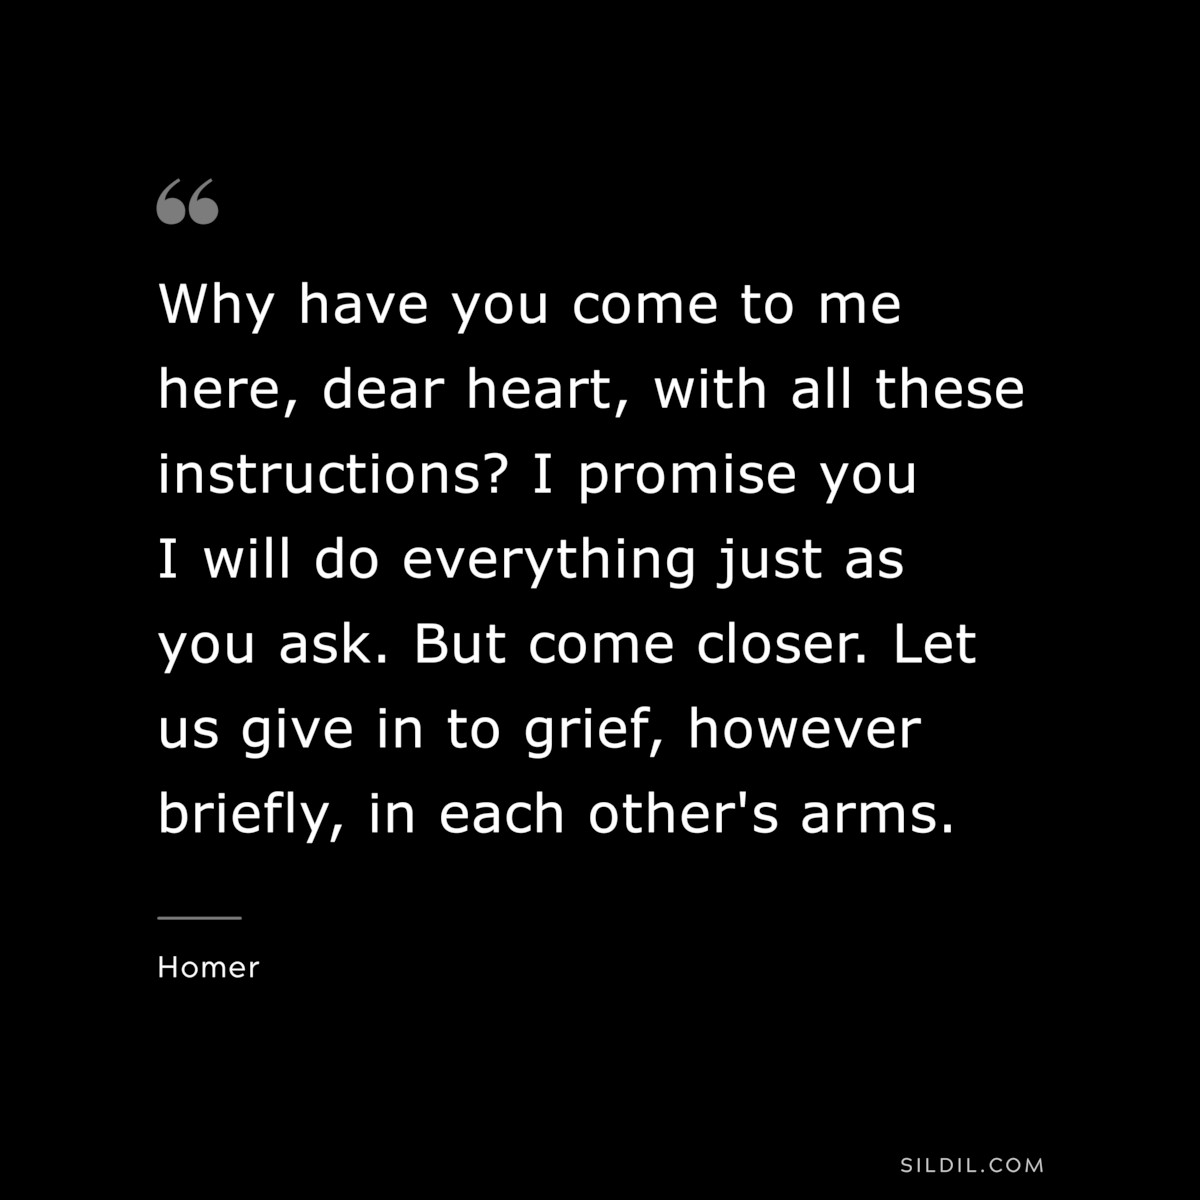 Why have you come to me here, dear heart, with all these instructions? I promise you I will do everything just as you ask. But come closer. Let us give in to grief, however briefly, in each other's arms. ― Homer